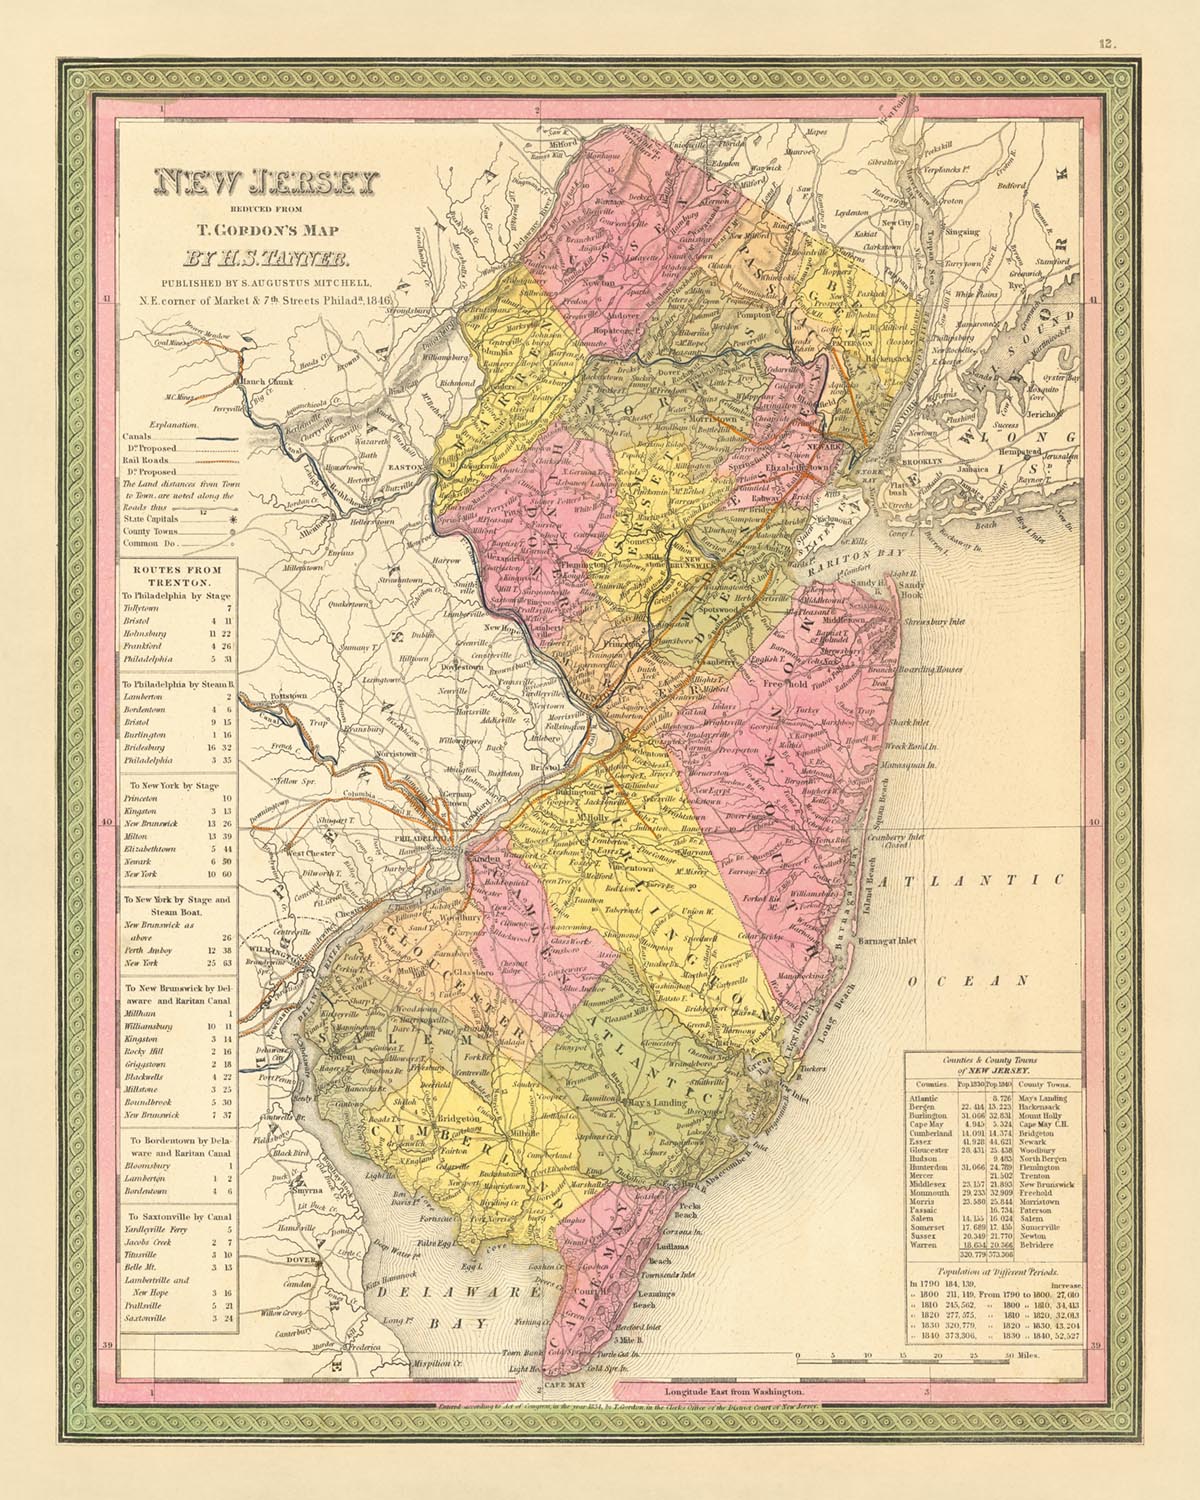 Old Map of New Jersey by Tanner, 1847: Garden State, New York City, Philadelphia, Trenton, Princeton, and Camden